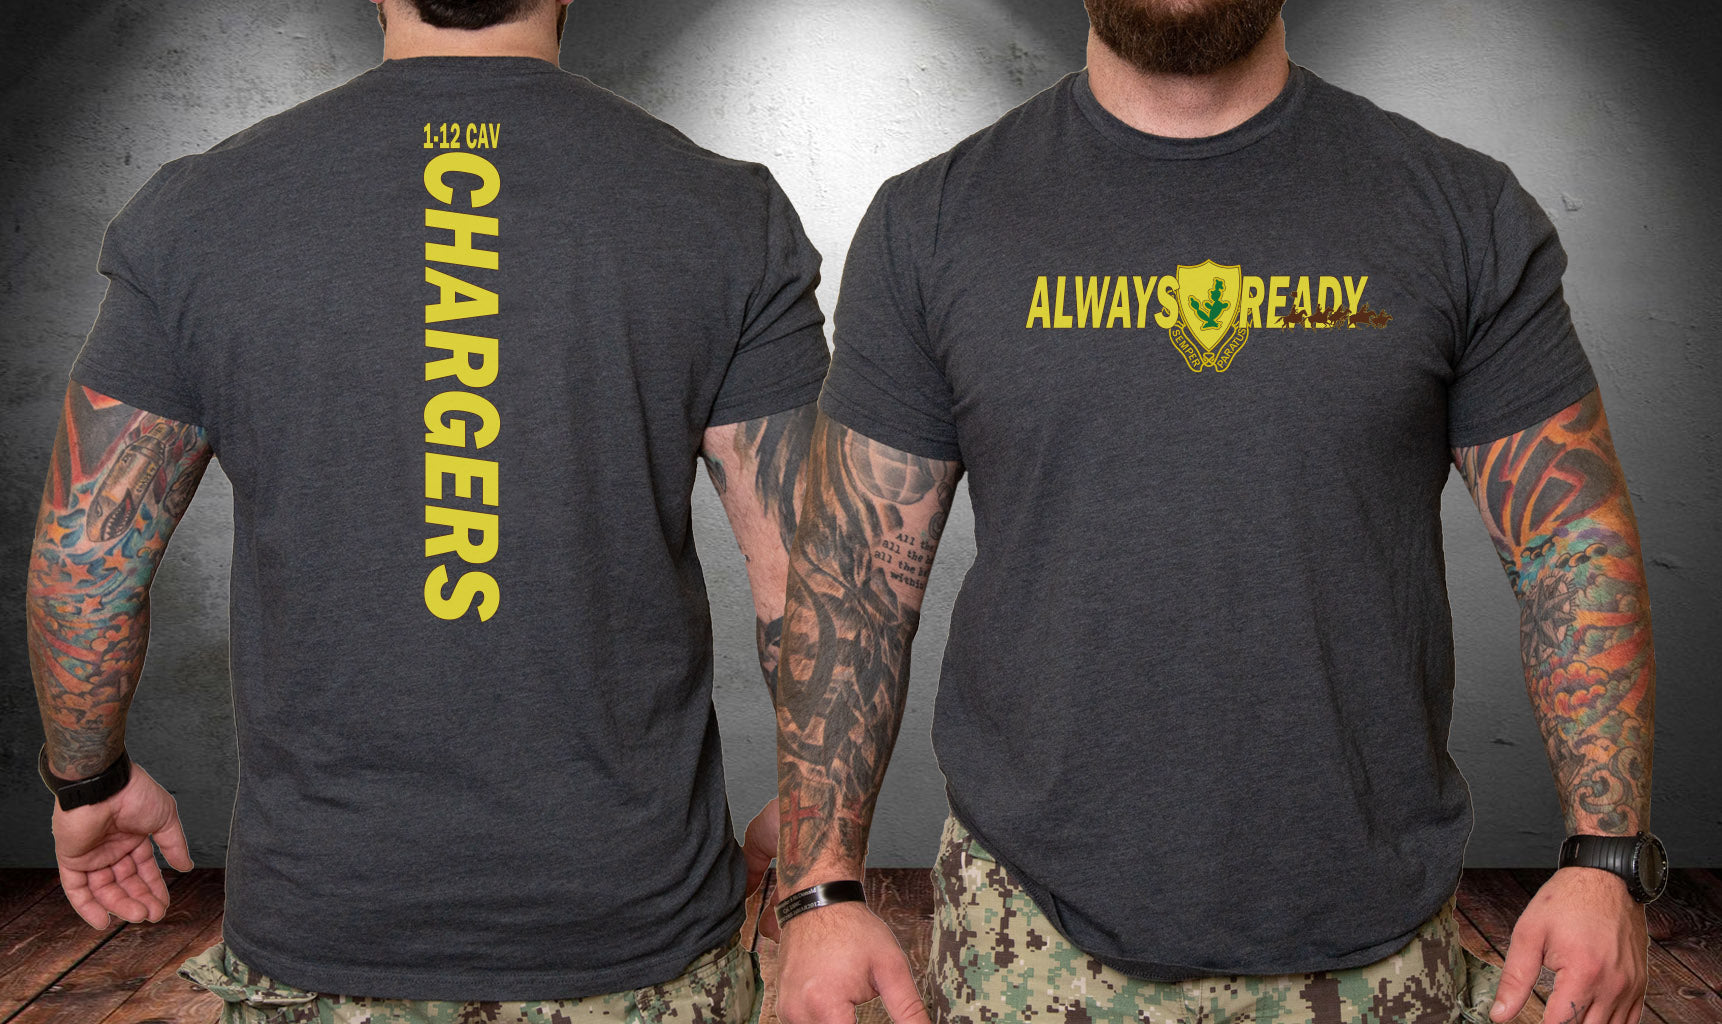 1-12 Cav Chargers Pride Shirt